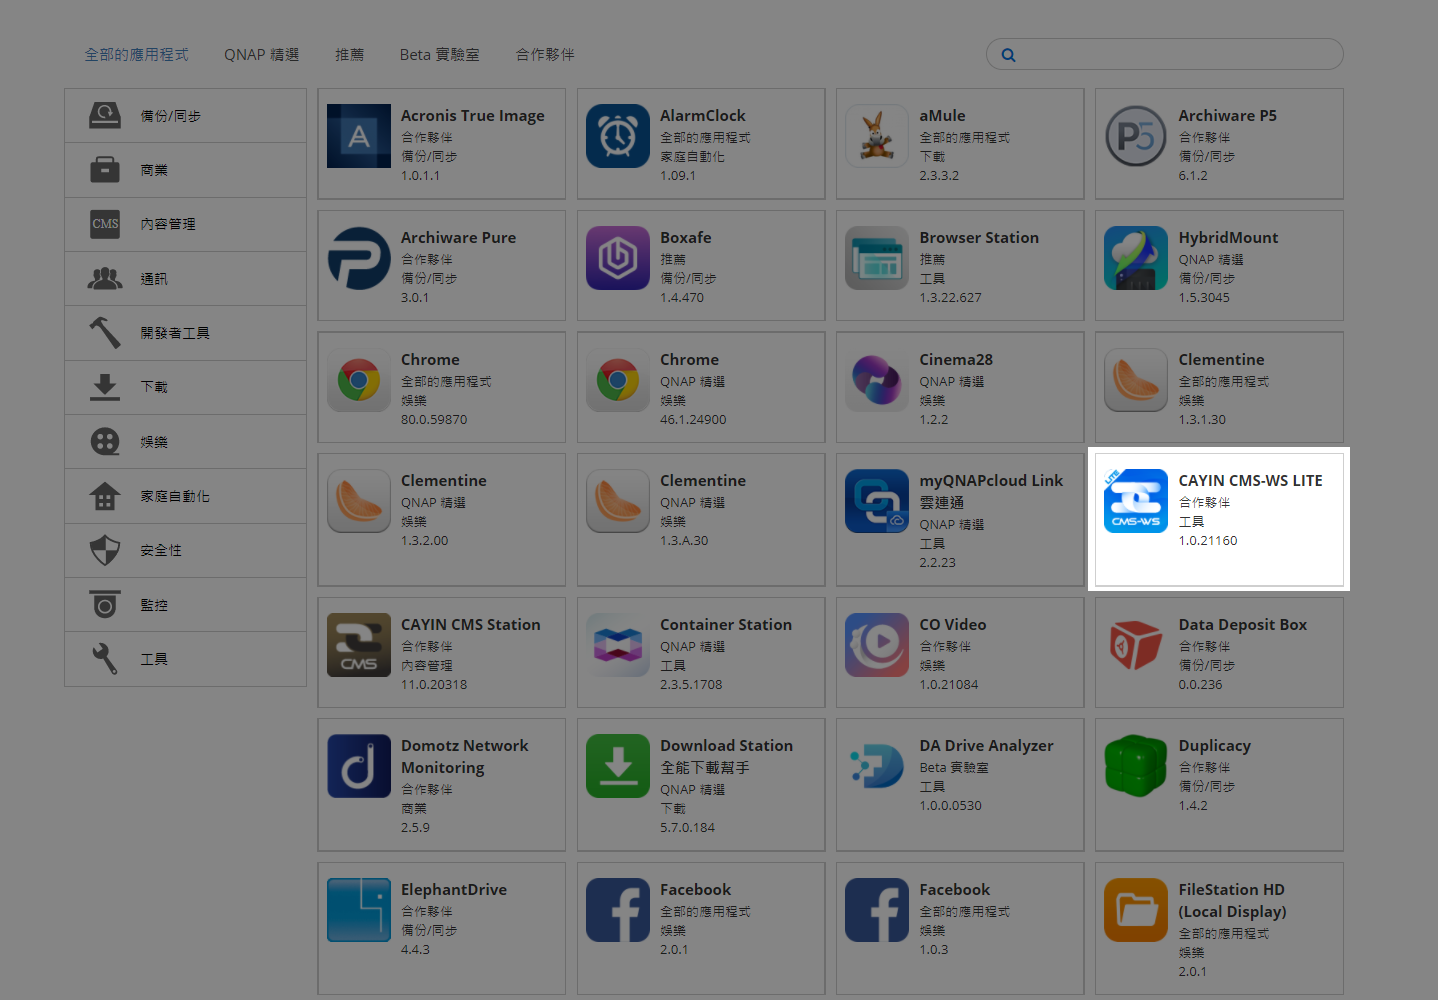 Go to QNAP App Center to search and install CAYIN CMS Station